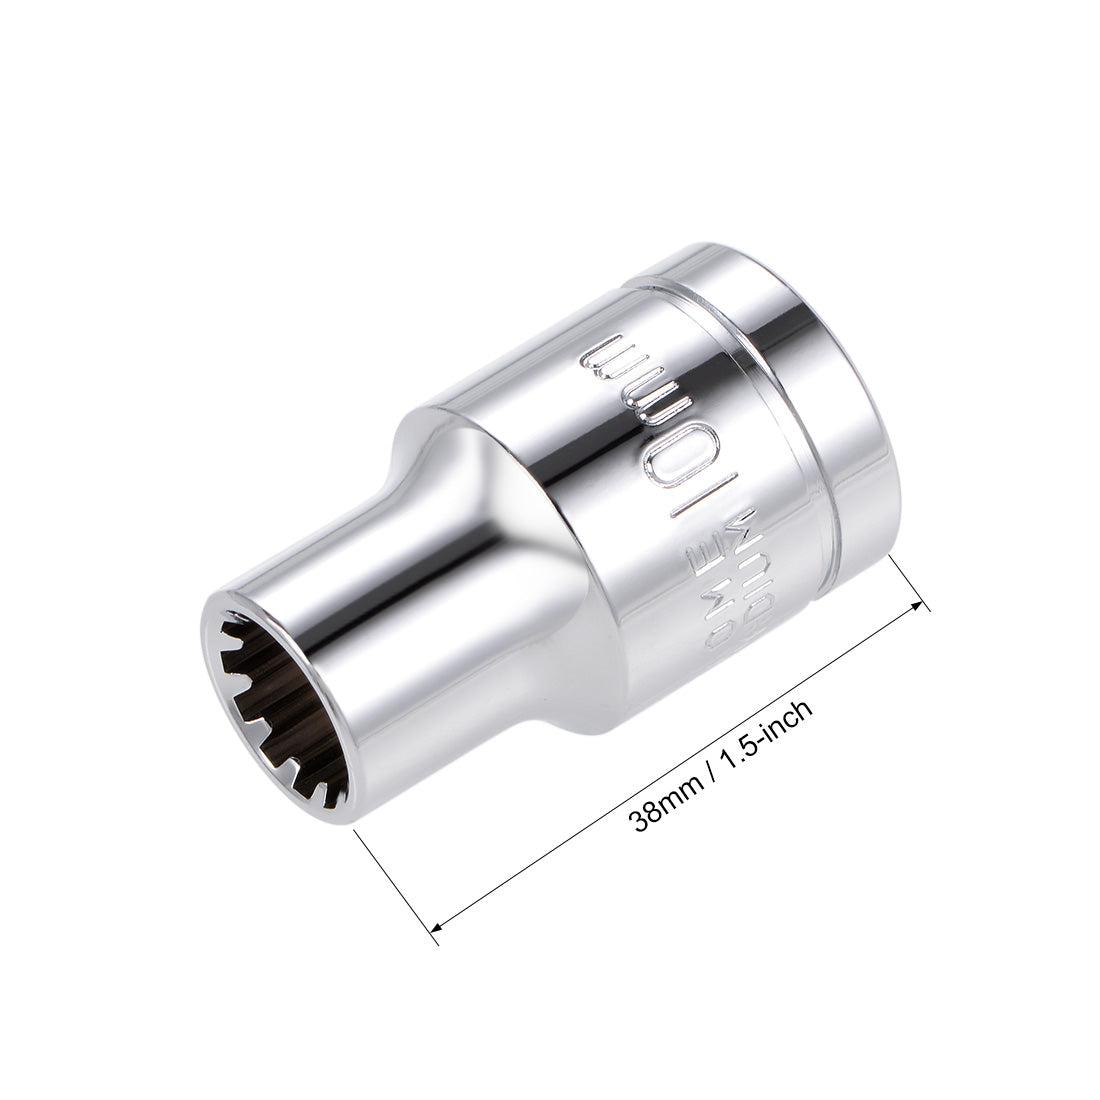 uxcell Uxcell 1/2-inch Drive E10 Universal Spline Socket Shallow 12 Point Cr-V Steel